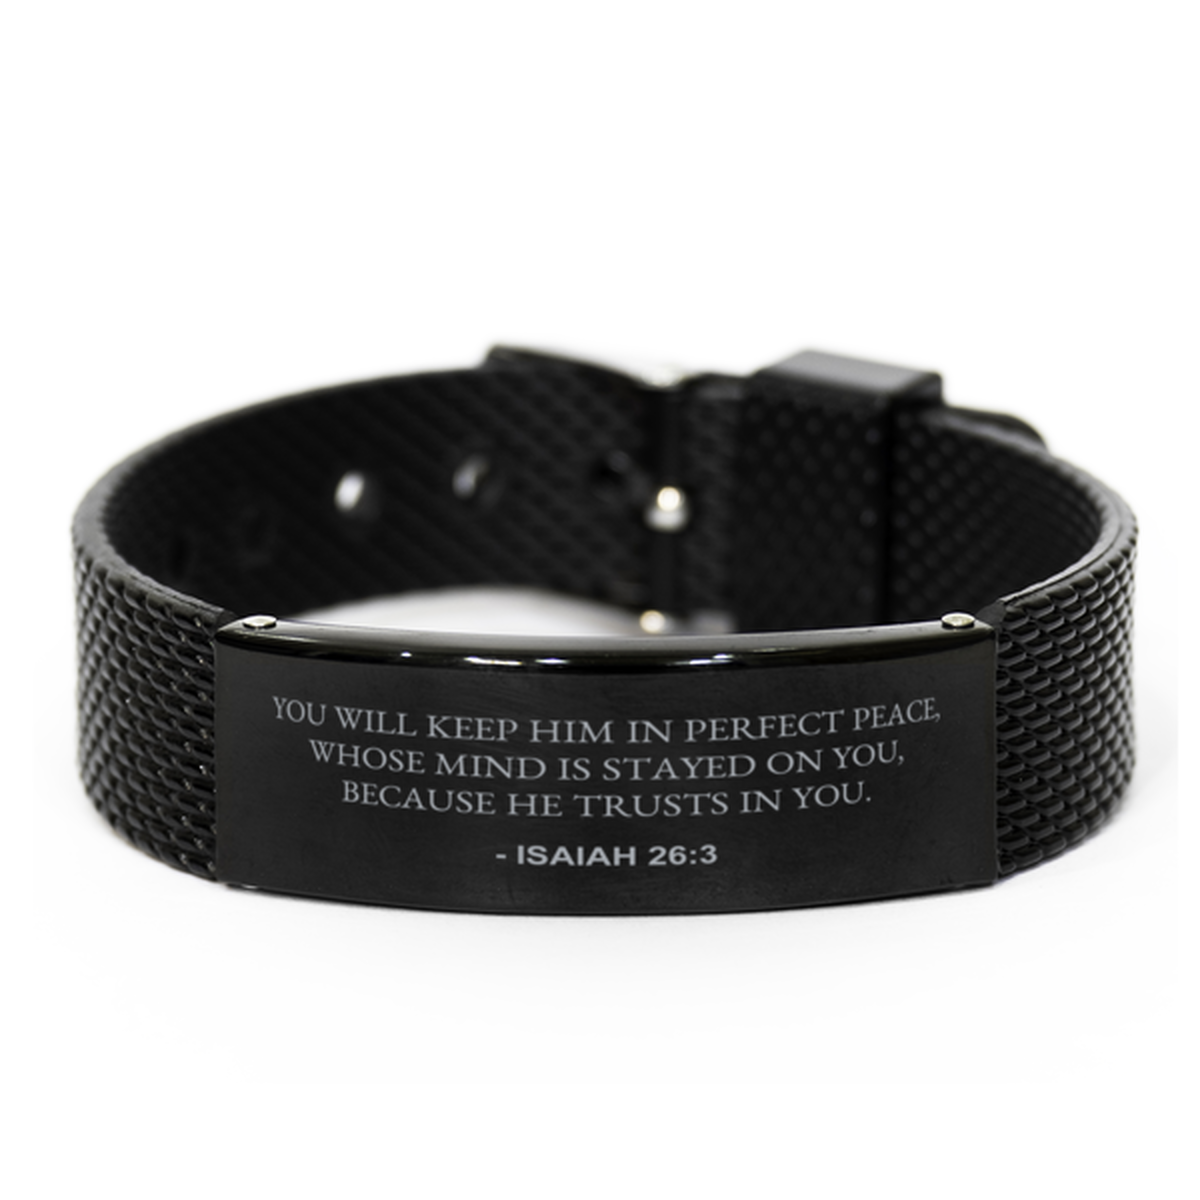 Christian Black Bracelet,, Isaiah 26:3 You Will Keep Him In Perfect Peace, Whose Mind Is, Motivational Bible Verse Gifts For Men Women